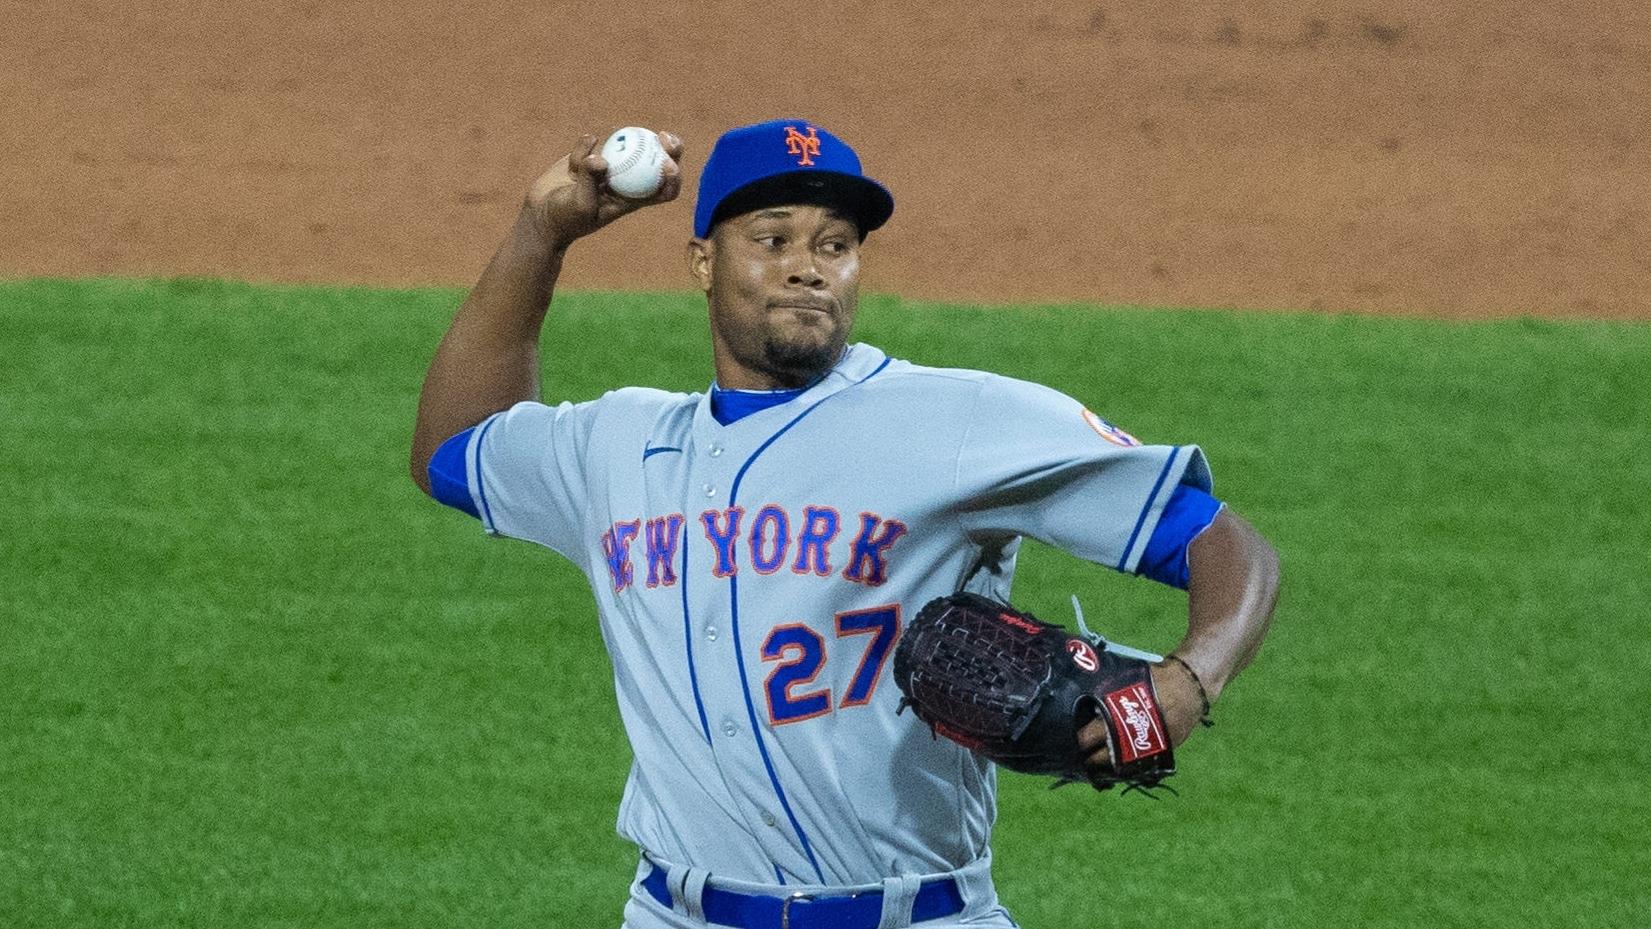 Apr 6, 2021; Philadelphia, Pennsylvania, USA; New York Mets relief pitcher Jeurys Familia (27) pitches during the ninth inning against the Philadelphia Phillies at Citizens Bank Park. / Bill Streicher-USA TODAY Sports